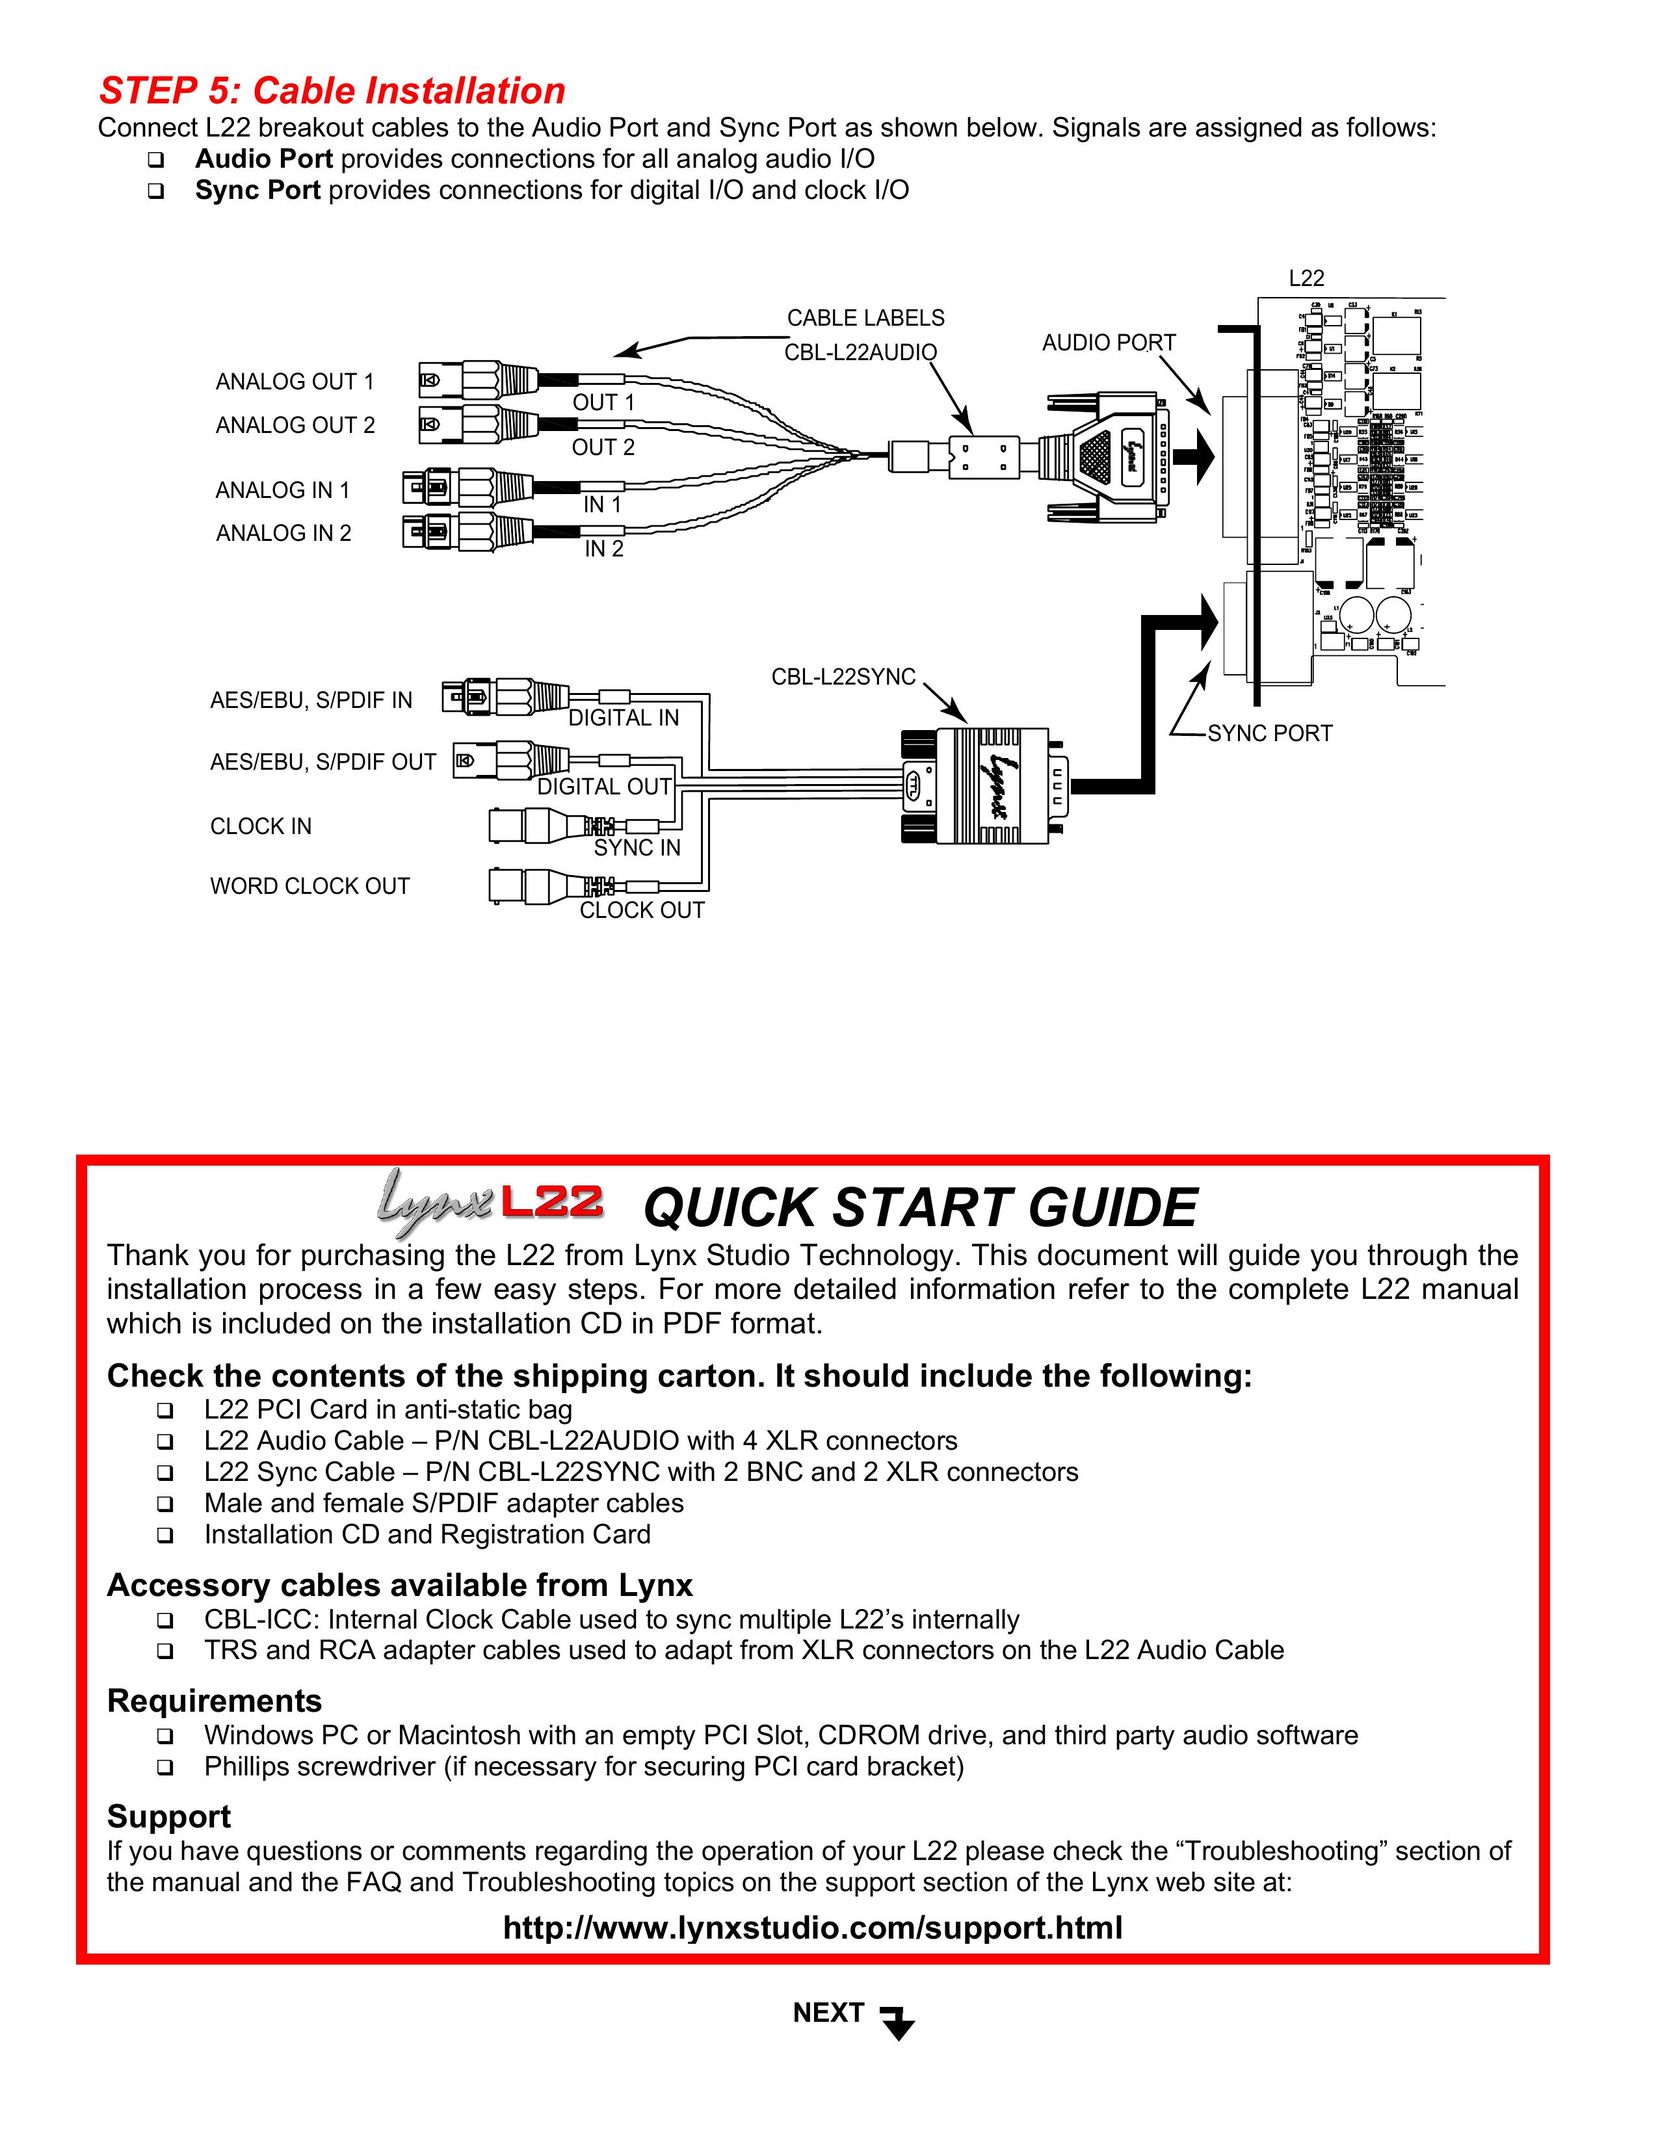 Lynx Audio Cable Computer Hardware User Manual